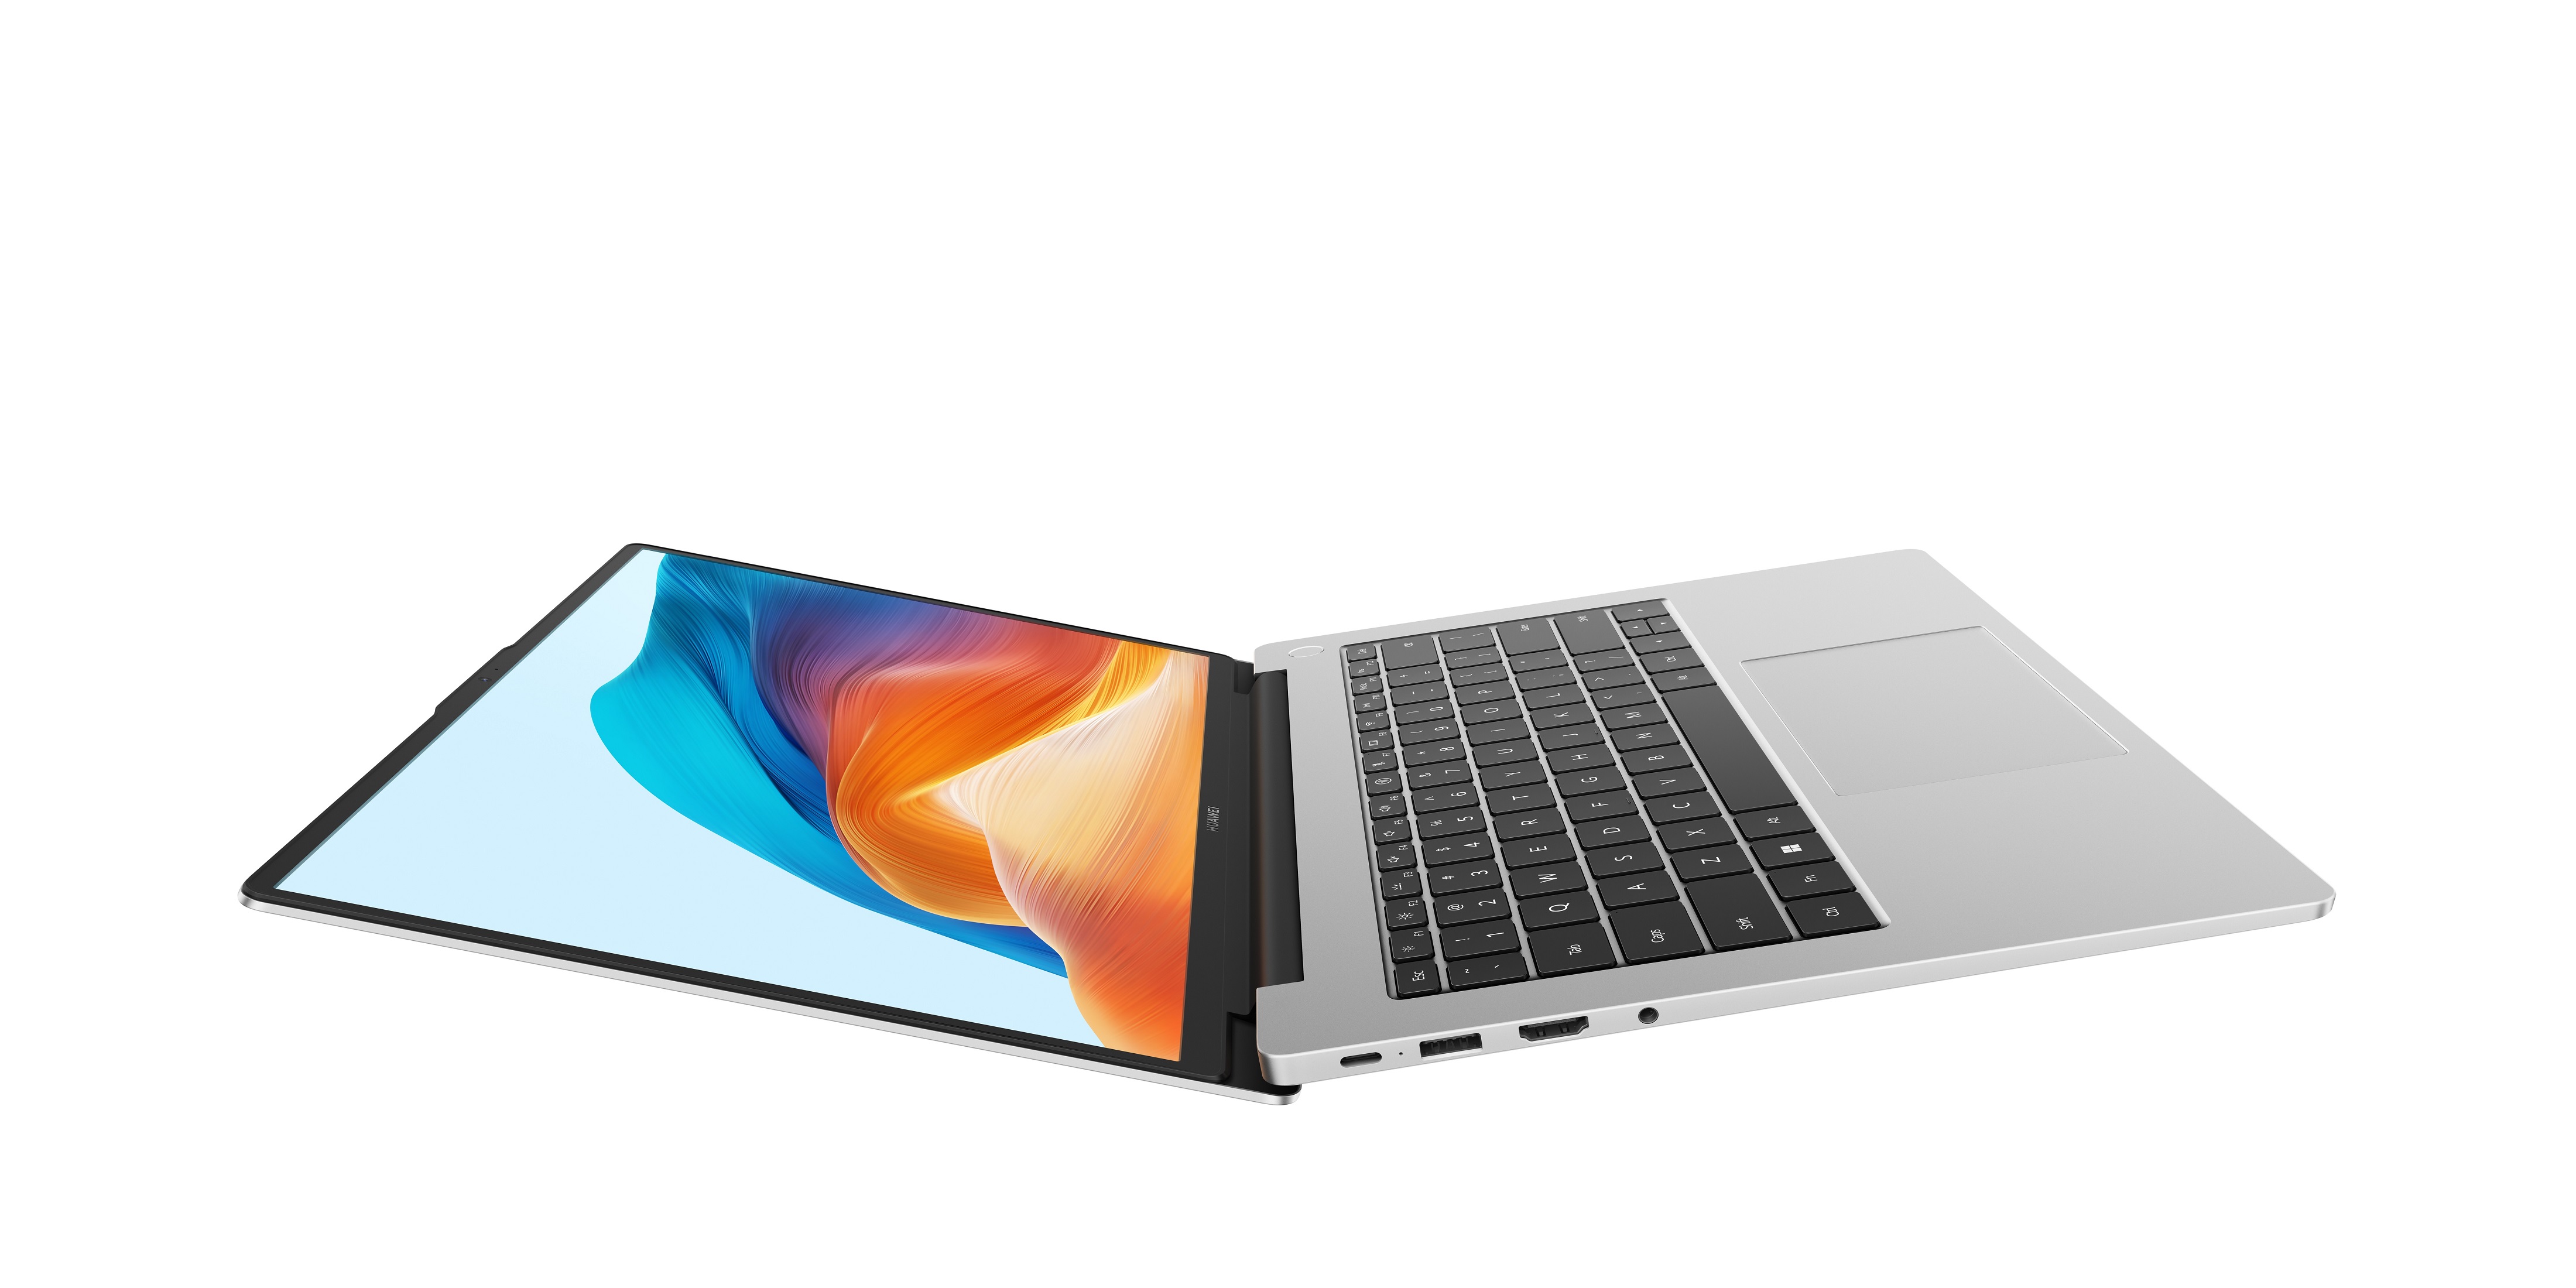 Huawei Unveils the New Trio for Seamless Connectivity and Performance: HUAWEI MateBook X Pro, HUAWEI MateBook D 14 and HUAWEI MatePad 11”